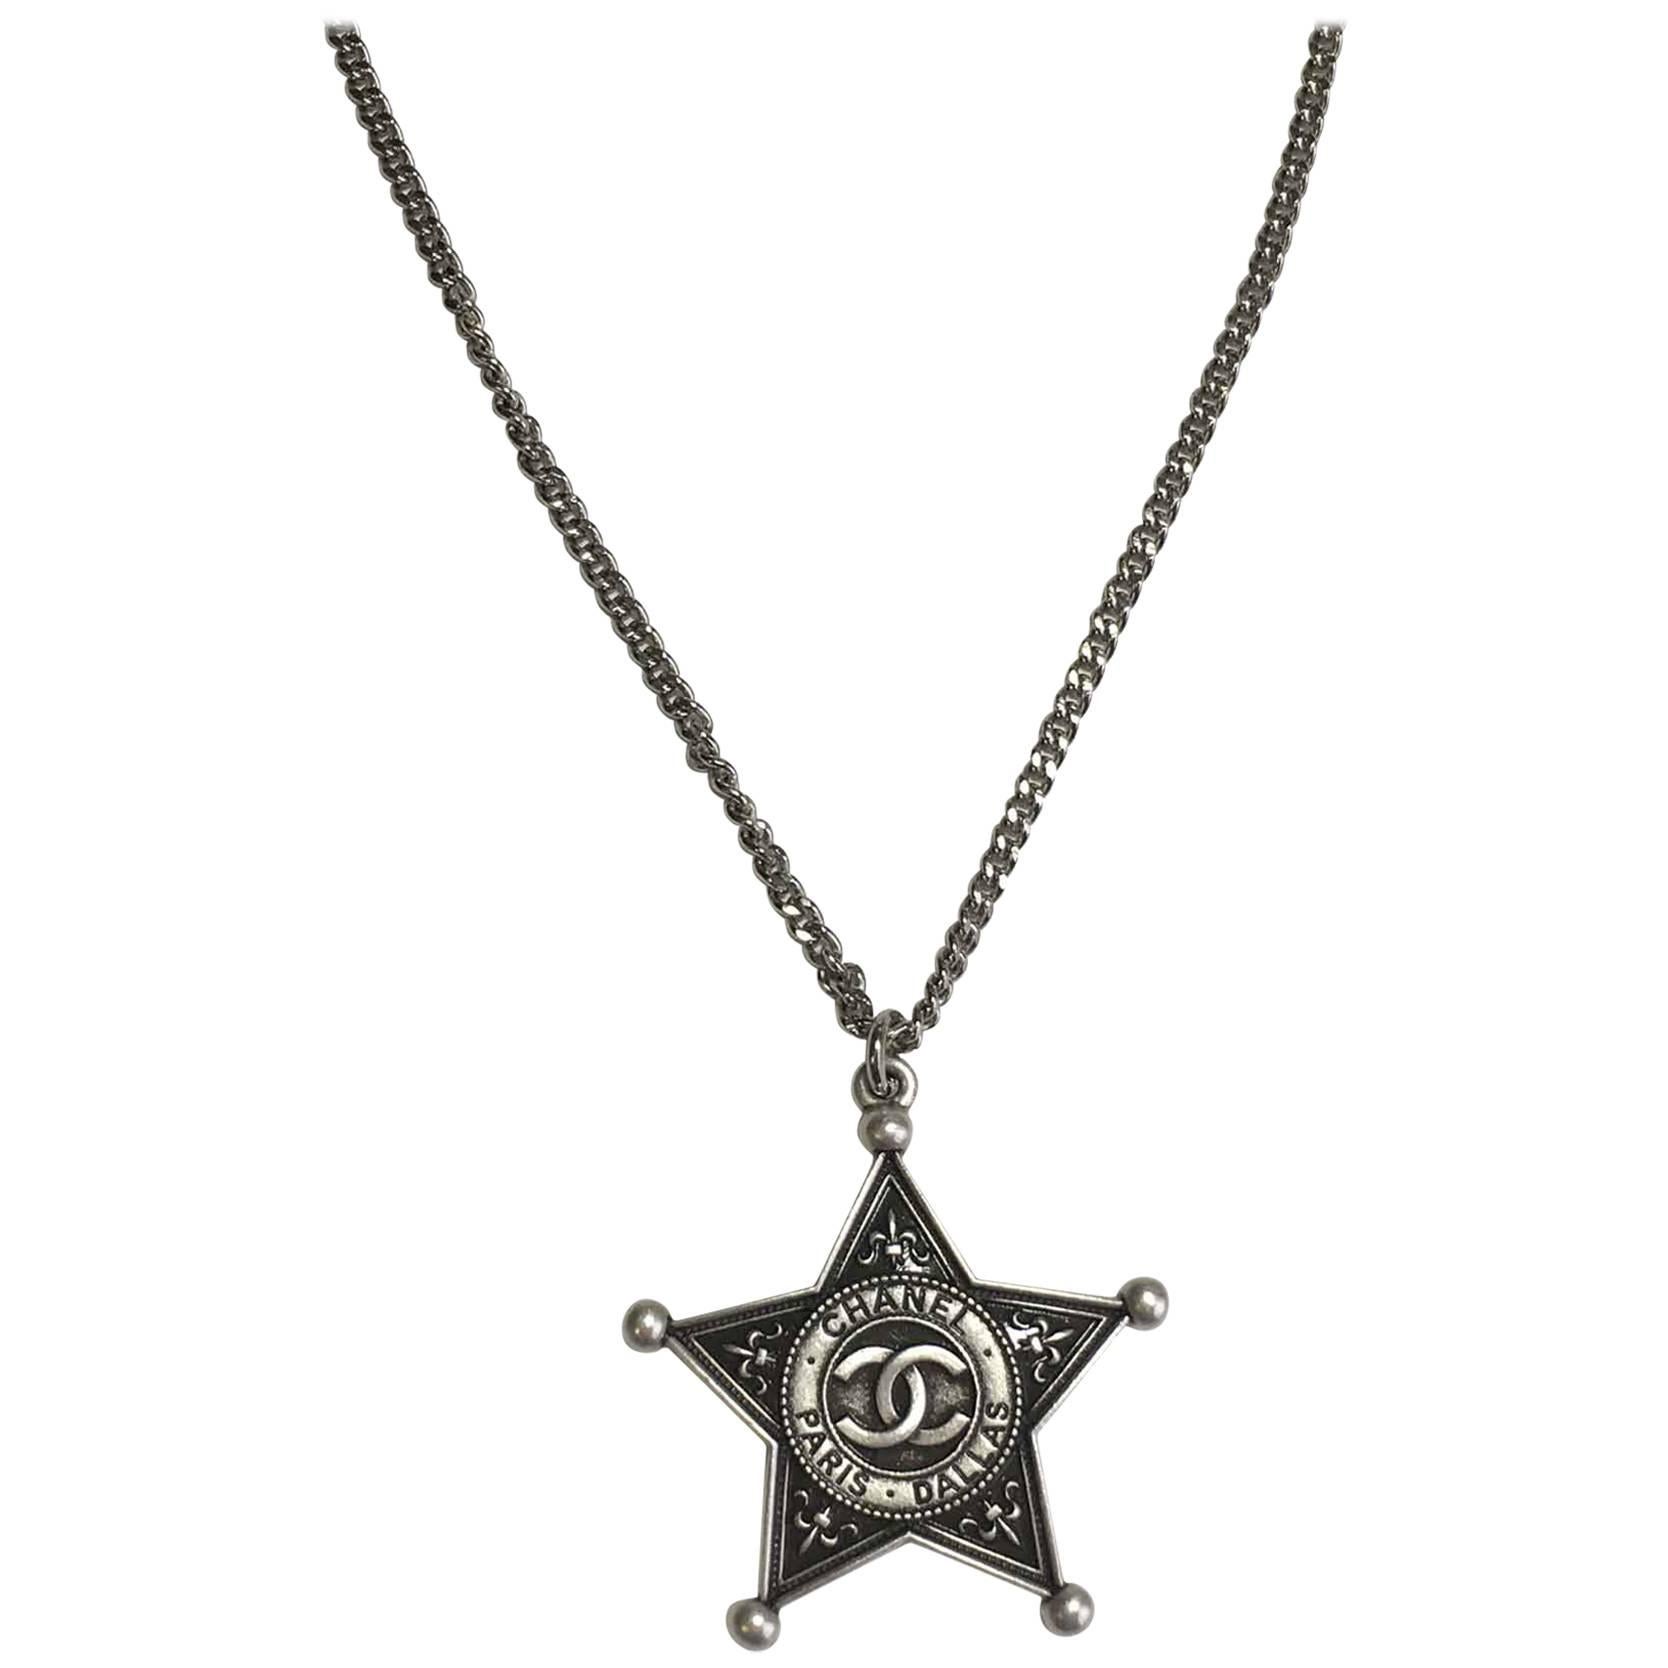 Chanel Necklace from Paris-Dallas Collection in Silver Plated Metal